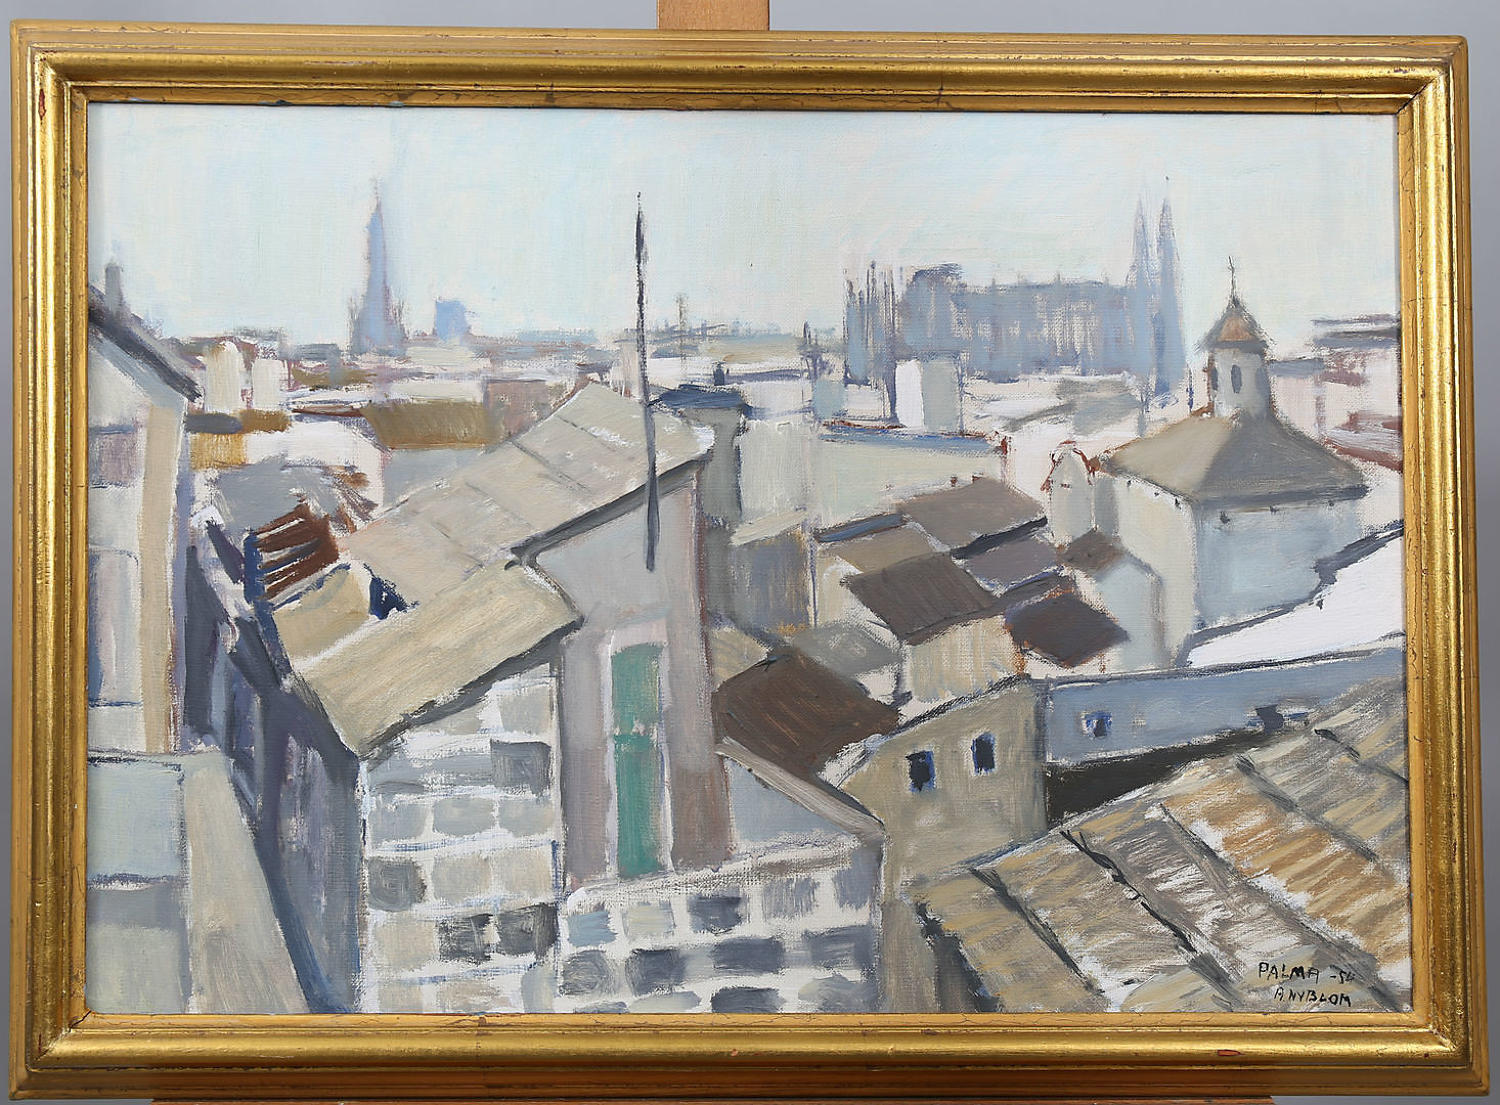 A. NYBLOOM, Palma '54 oil on canvas.